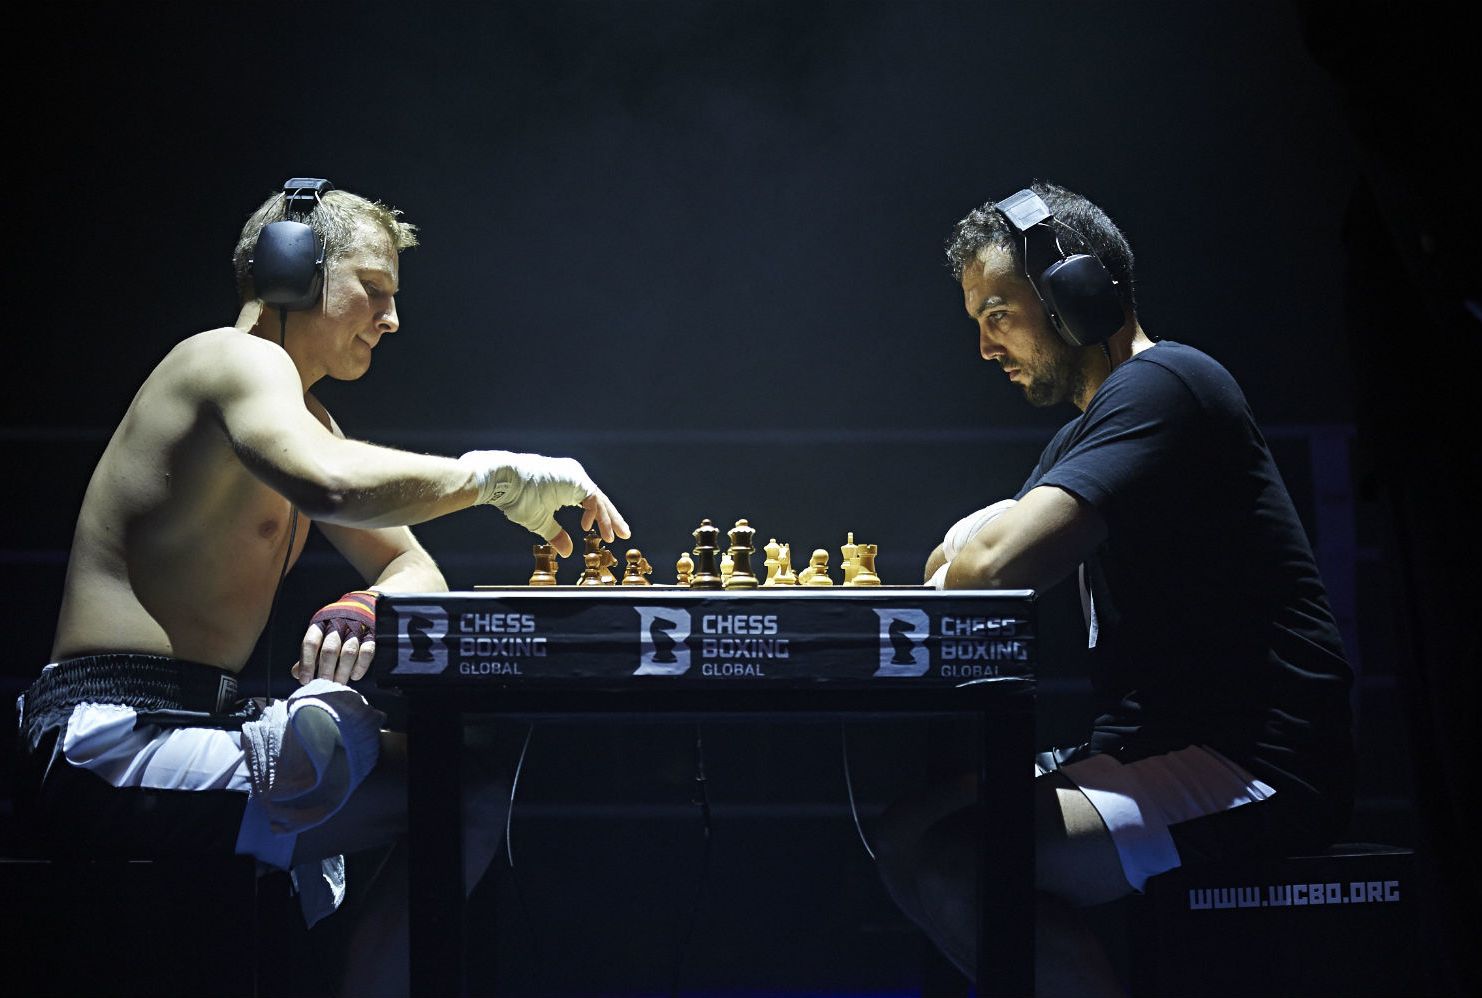 Oprør charter komponist By Pawn or by Brawn: Inside the Chessboxing Movement | Mental Floss